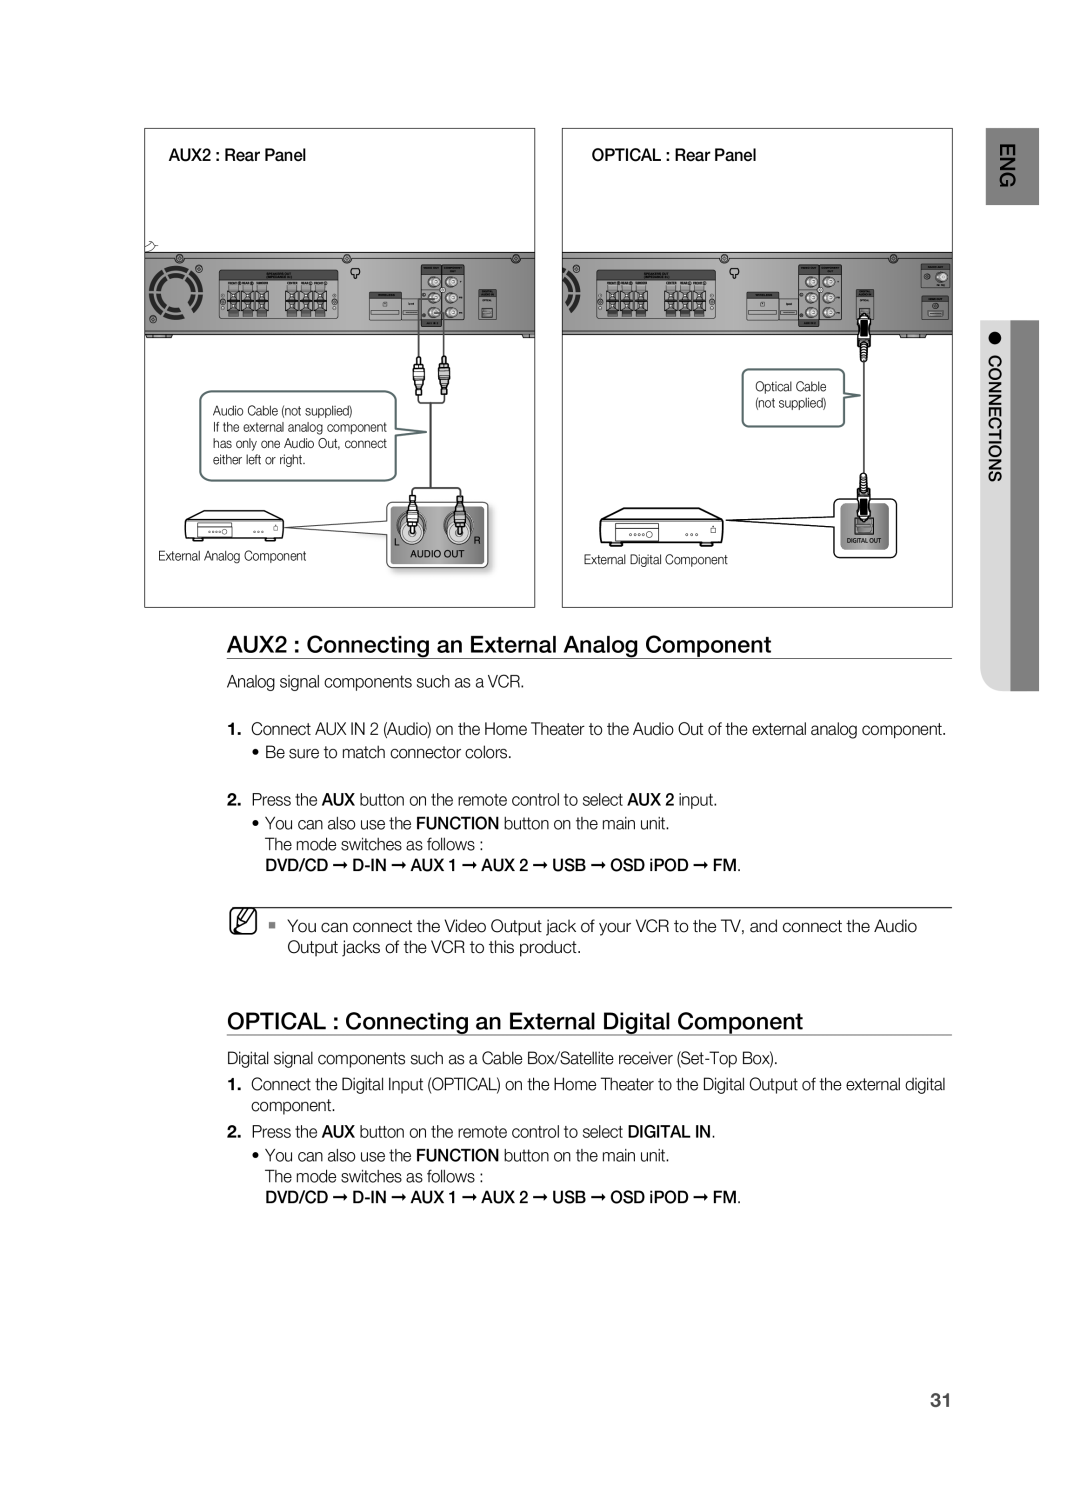 Samsung HT-TWZ415 user manual AUX2 Connecting an External Analog Component 